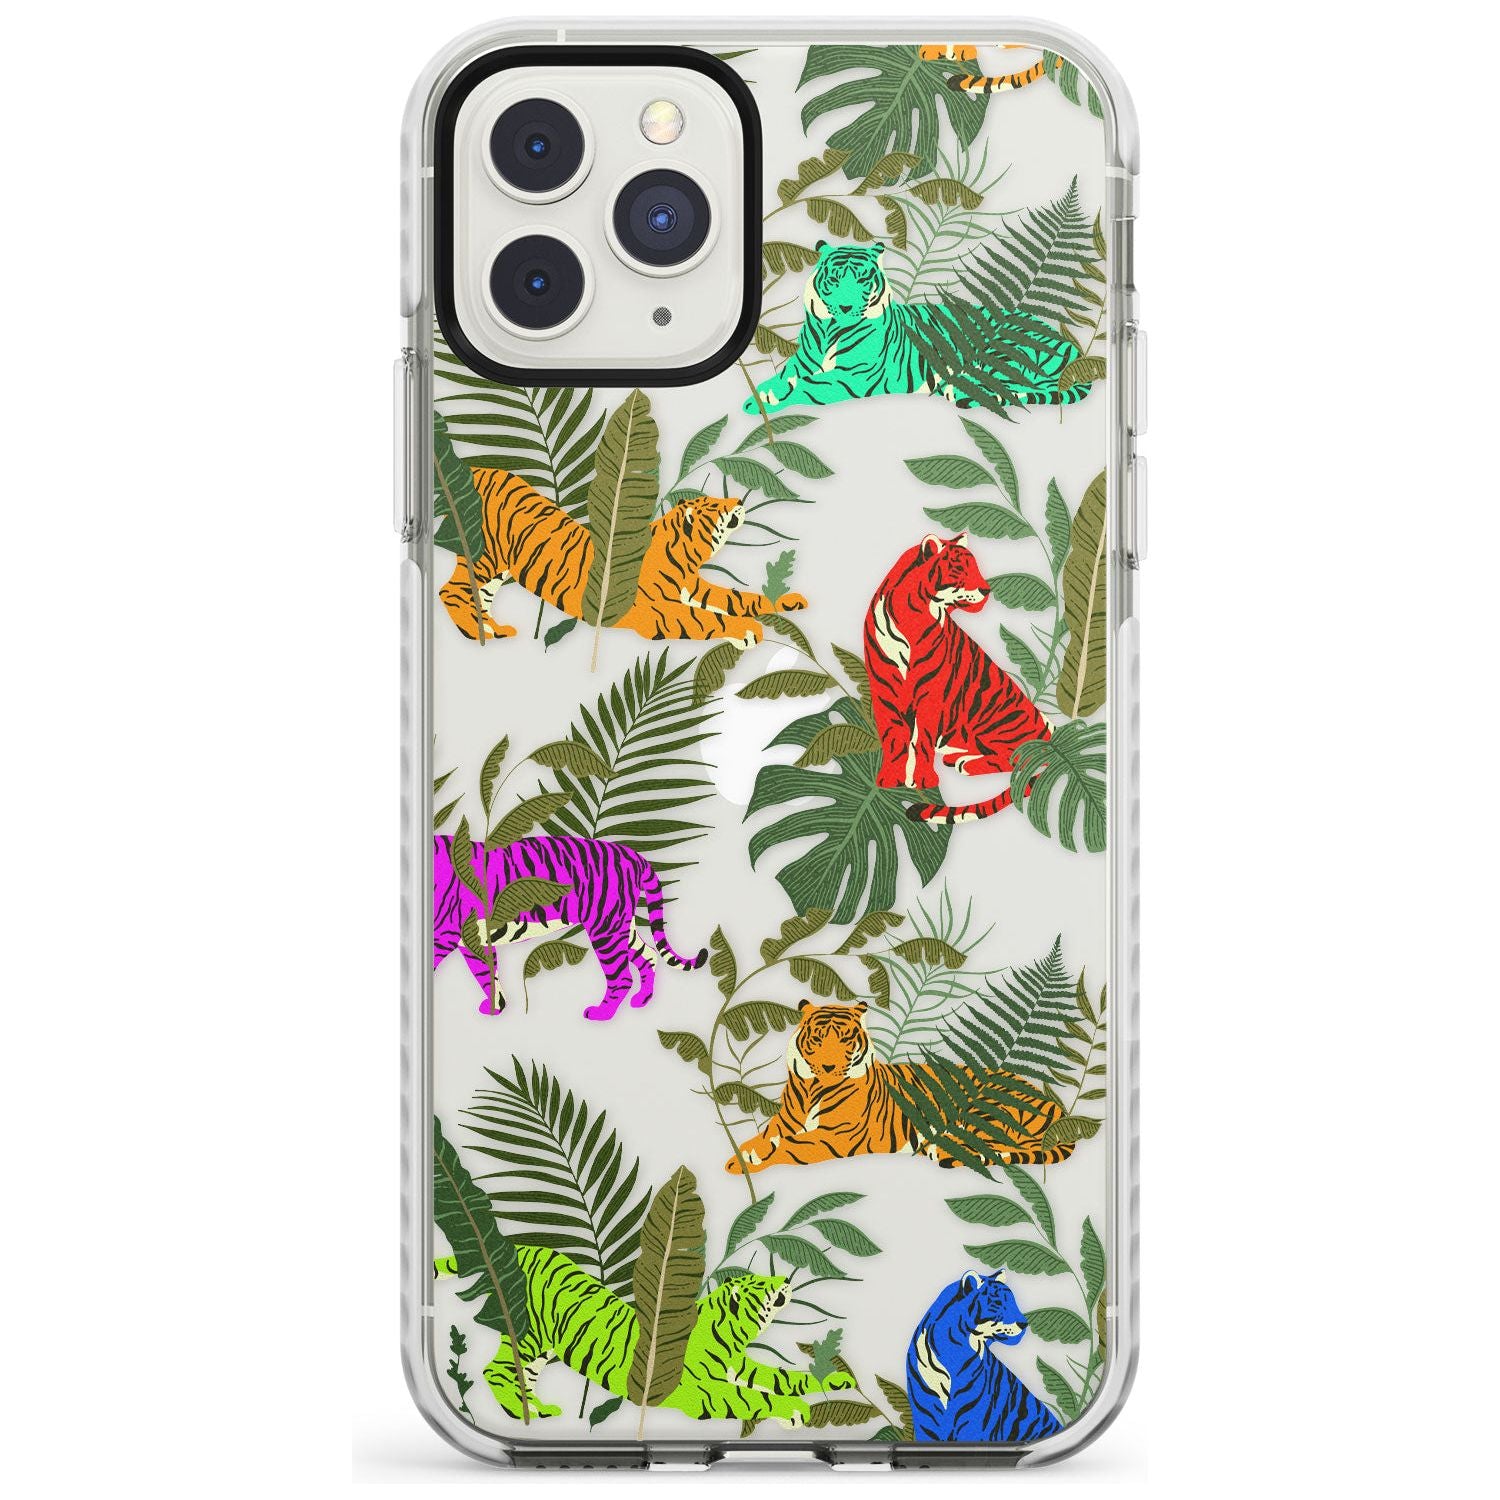 Colourful Tiger Jungle Cat Pattern Impact Phone Case for iPhone 11 Pro Max